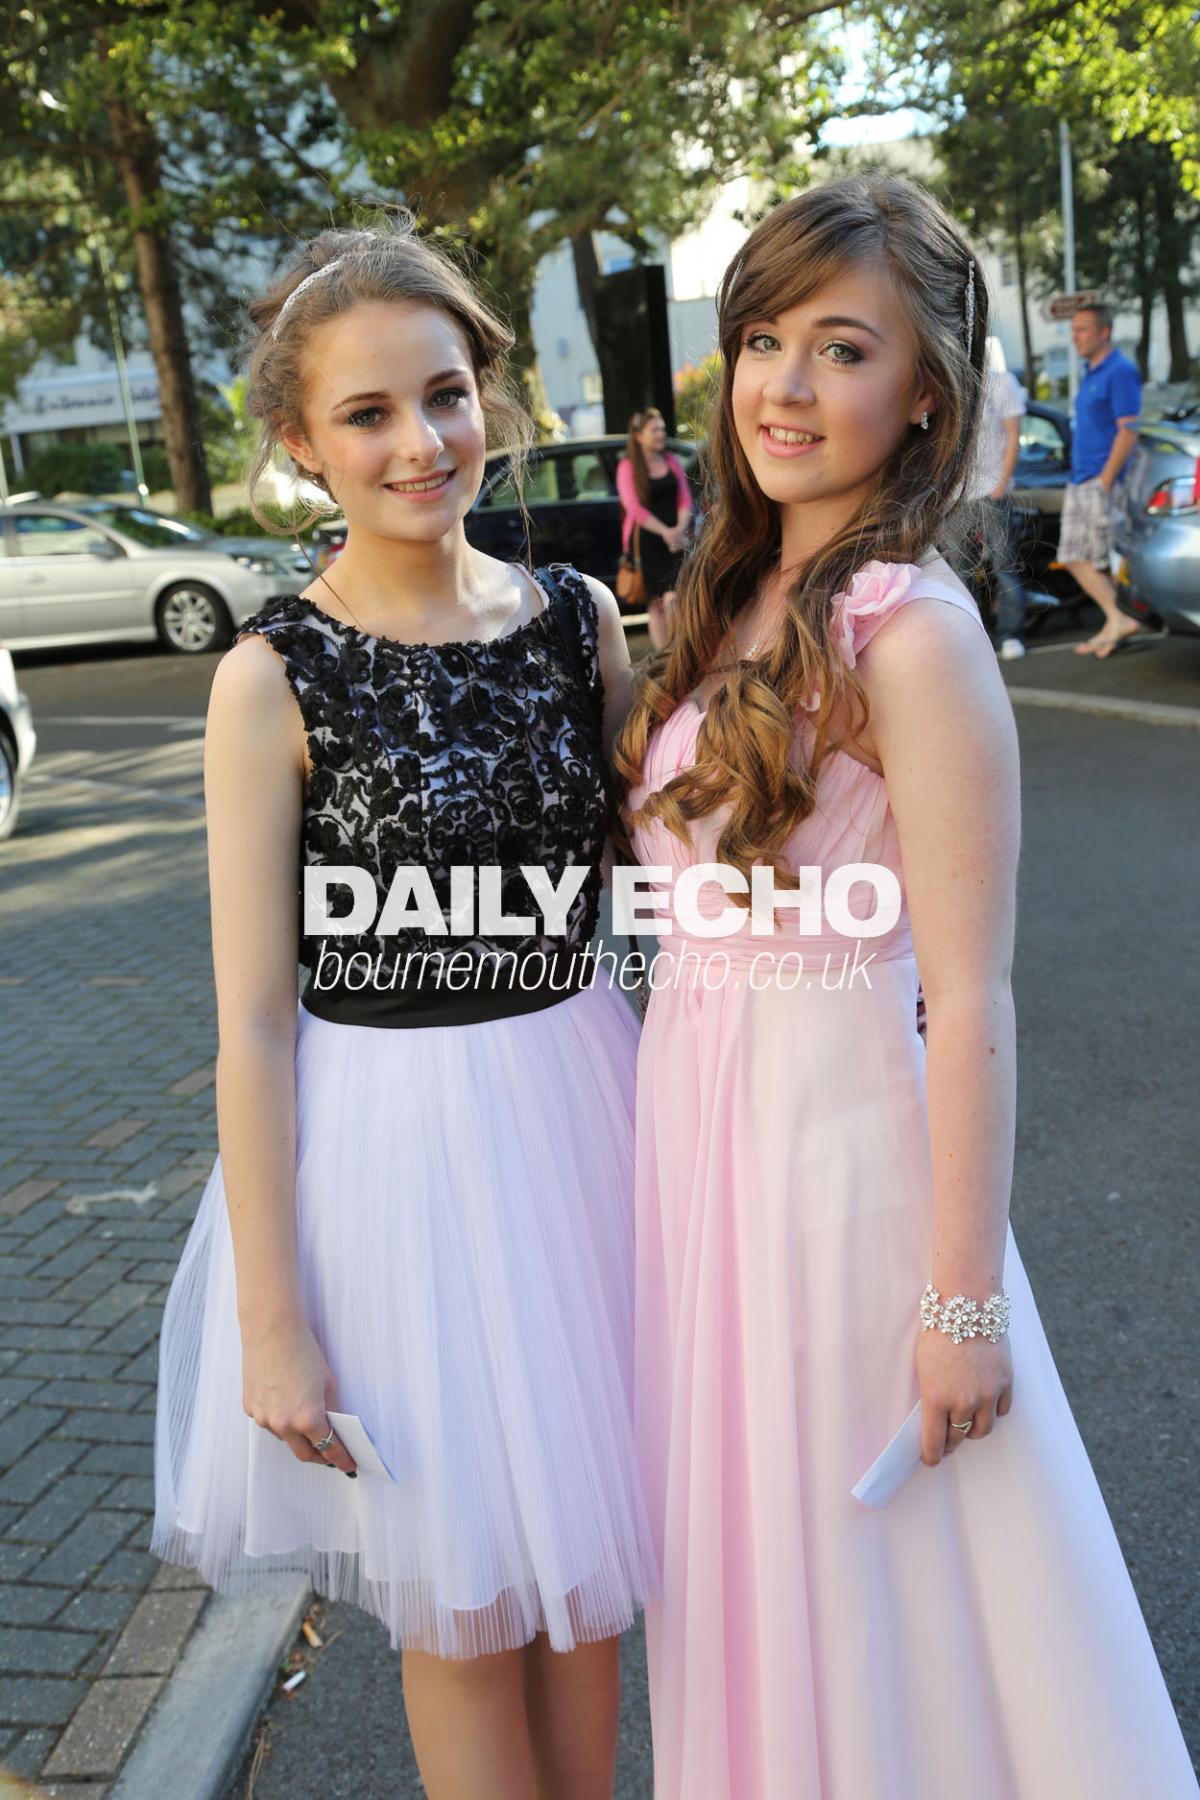 Winton and Glenmoor Academies Year 11 prom at the Queen's Hotel in Bournemouth on 3rd July 2014